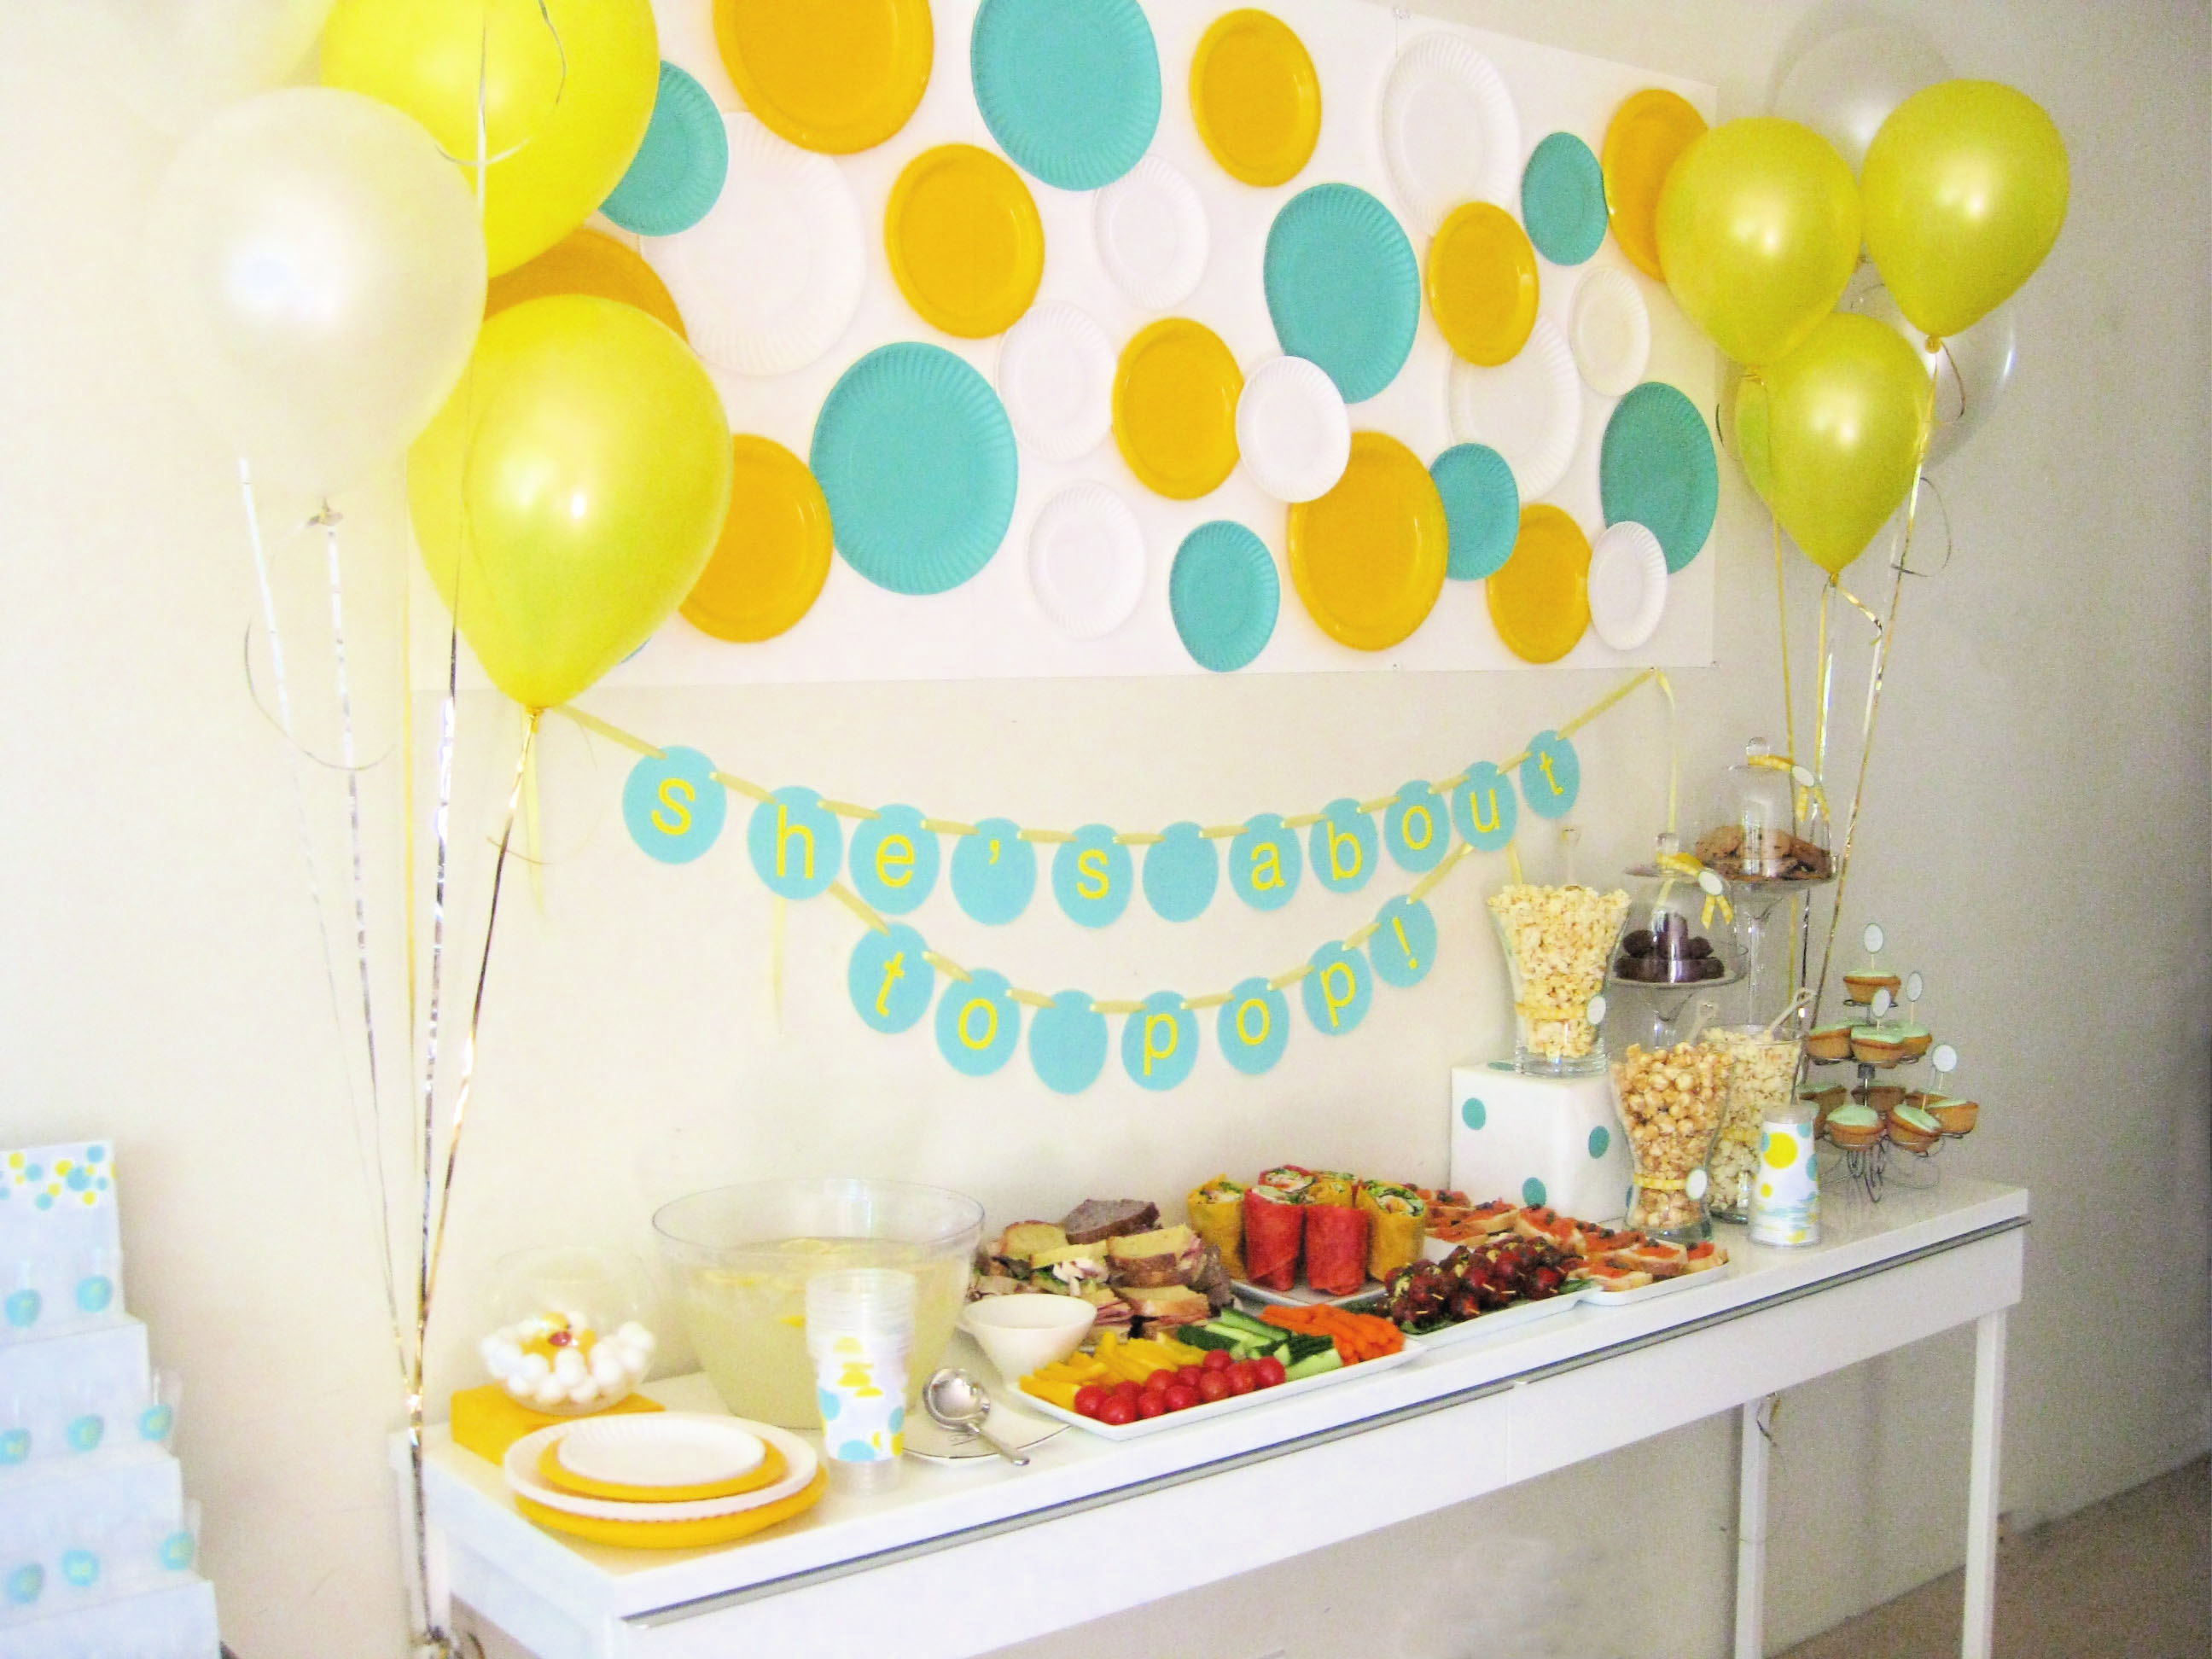 She's About to Pop Baby Shower - Project Nursery